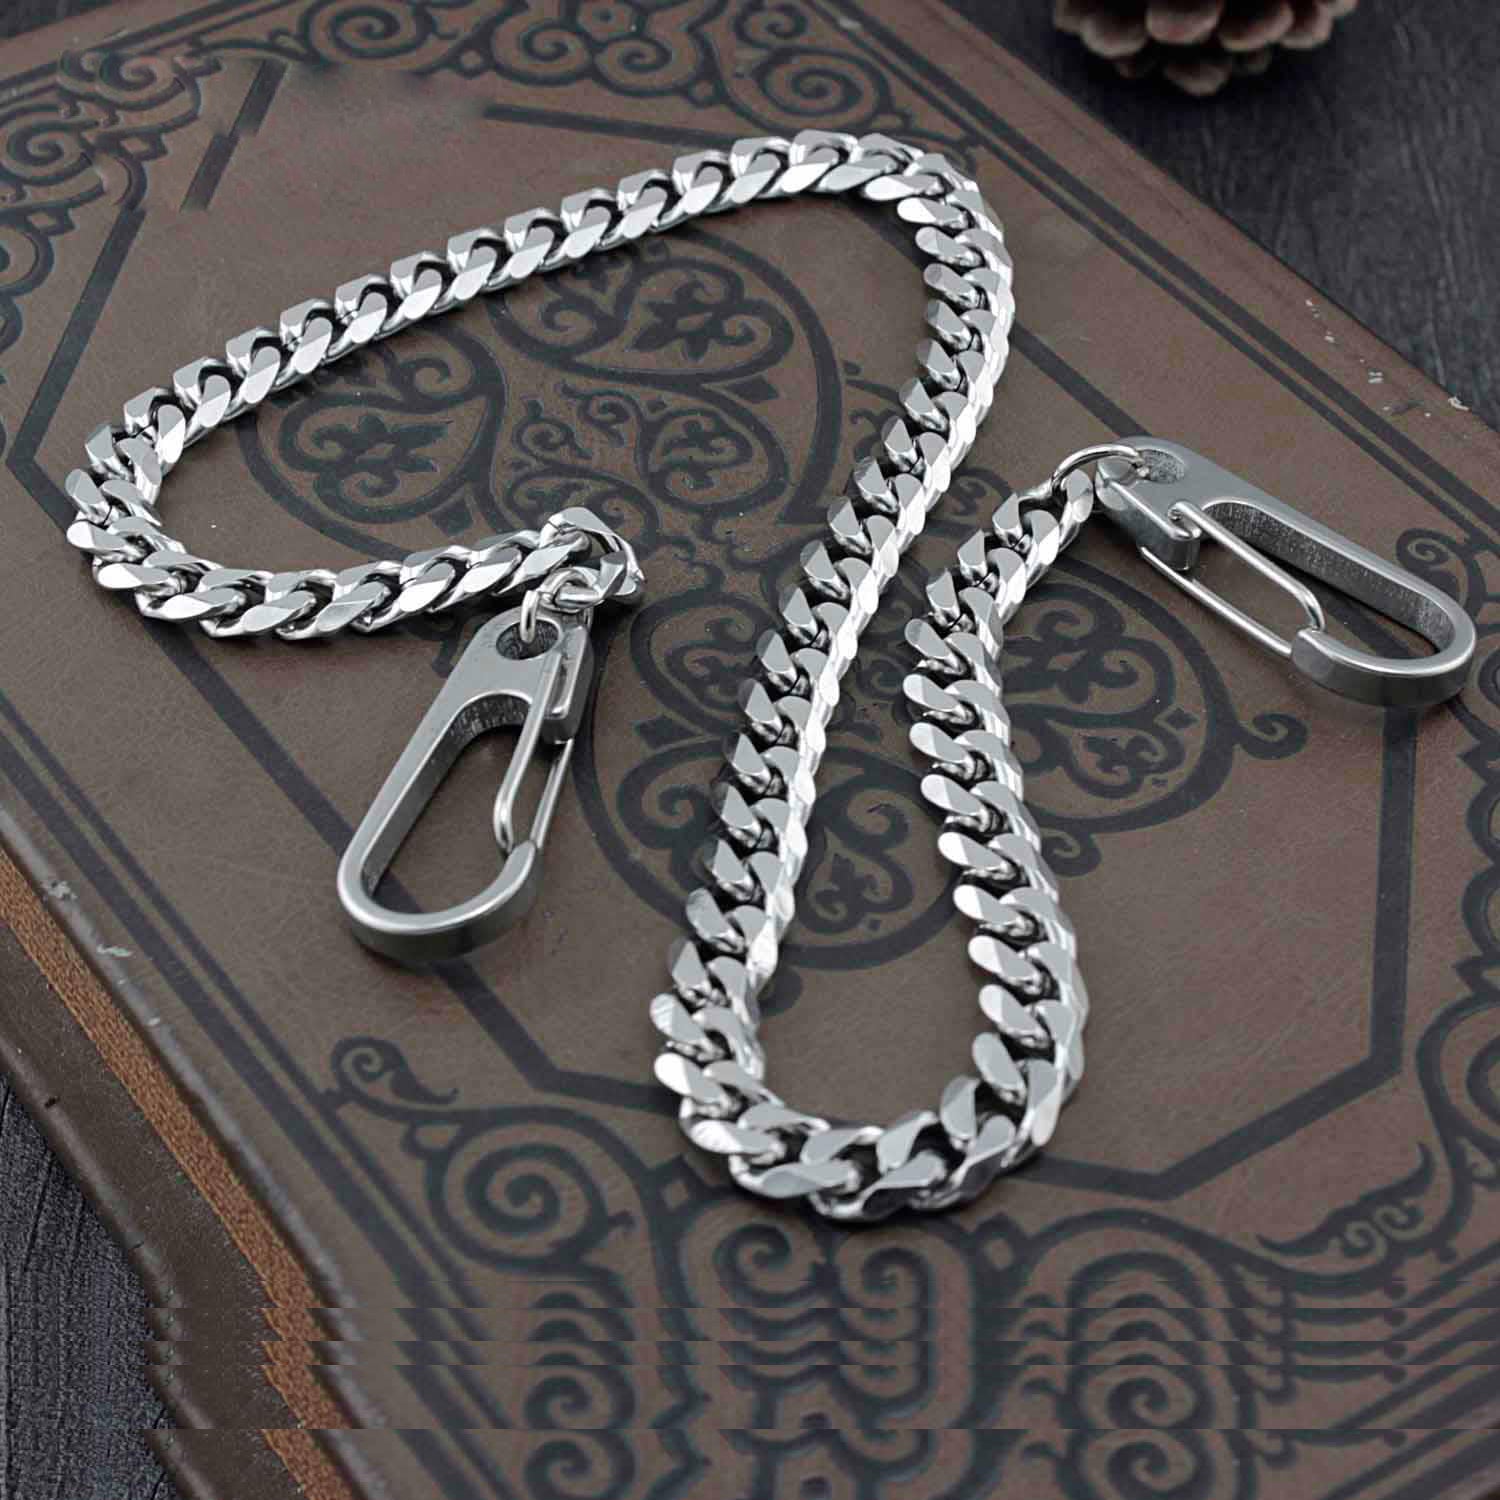 Solid Stainless Steel Wallet Chain Cool Punk Rock Biker Trucker Wallet Chain Trucker Wallet Chain for Men